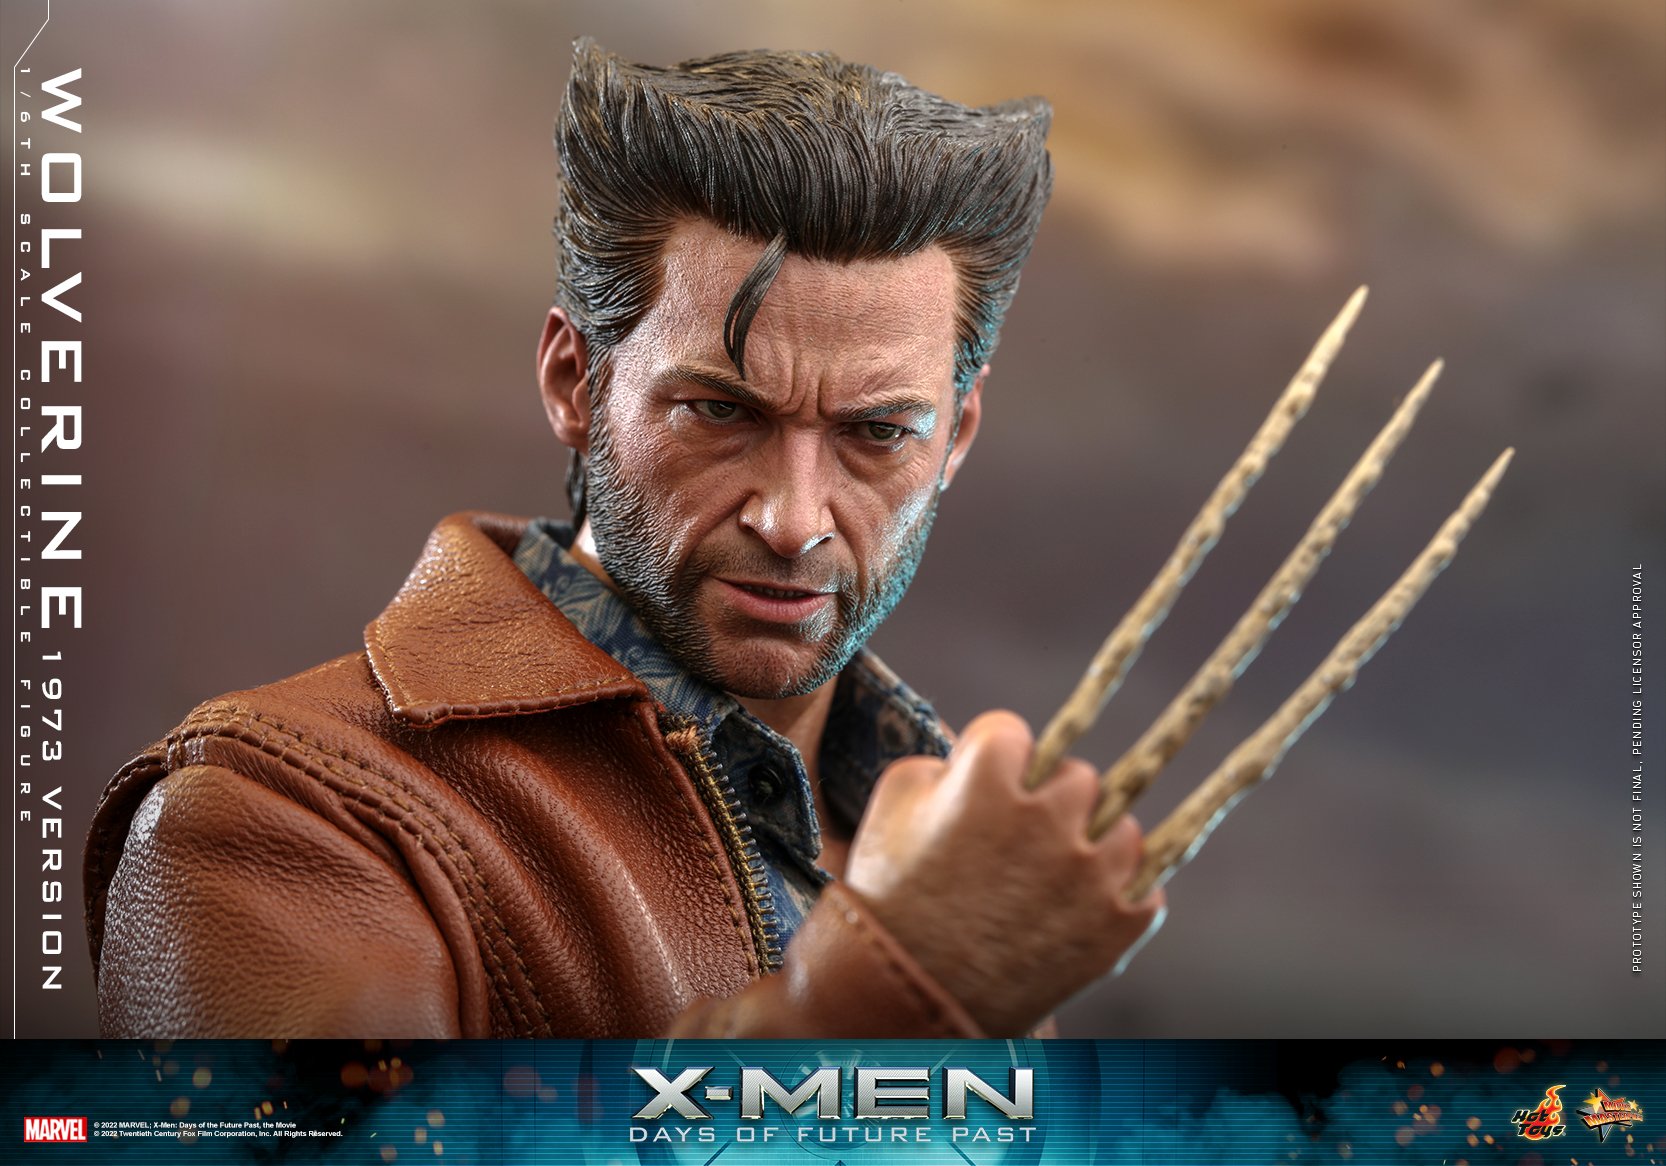 Hot Toys - MMS659 - X-Men: Days of Future Past - Wolverine (1973 Ver.)